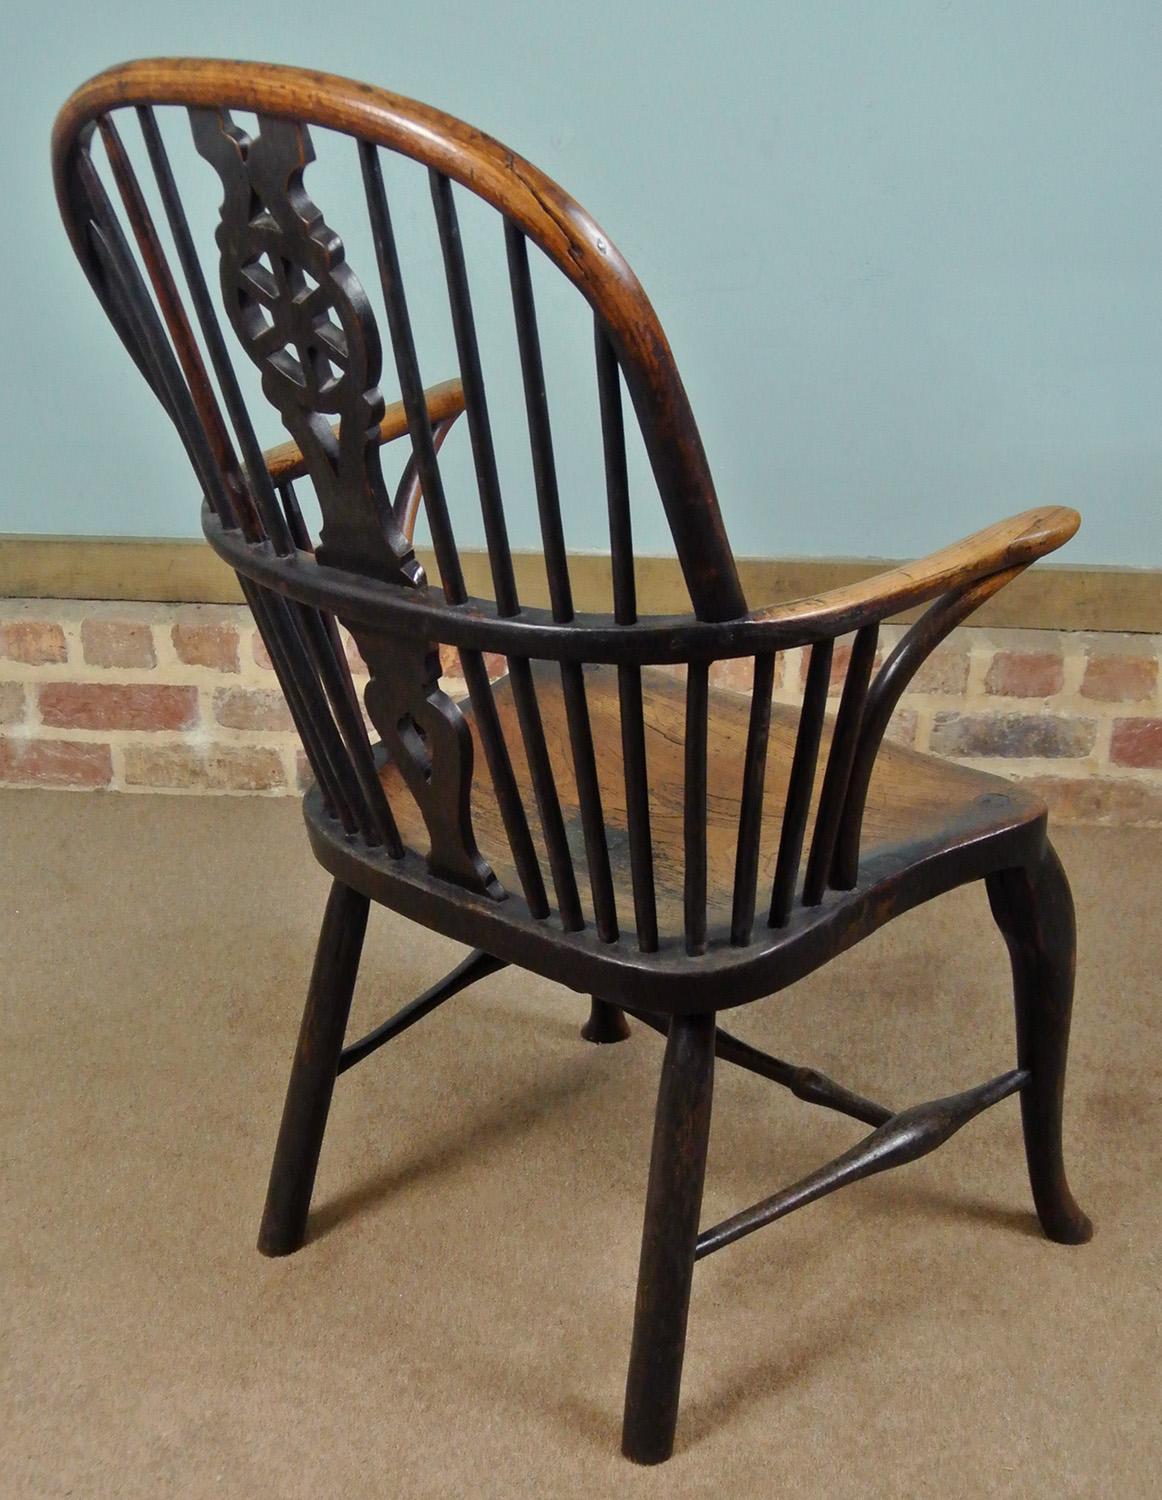 A charming ash and elm low back Windsor chair, George III c. 1780, with a well carved wheel to the splat and beautiful cabriole legs to front.

Very comfortable and sturdy, heavy and in good original condition. No breaks, repairs or re-tipping to